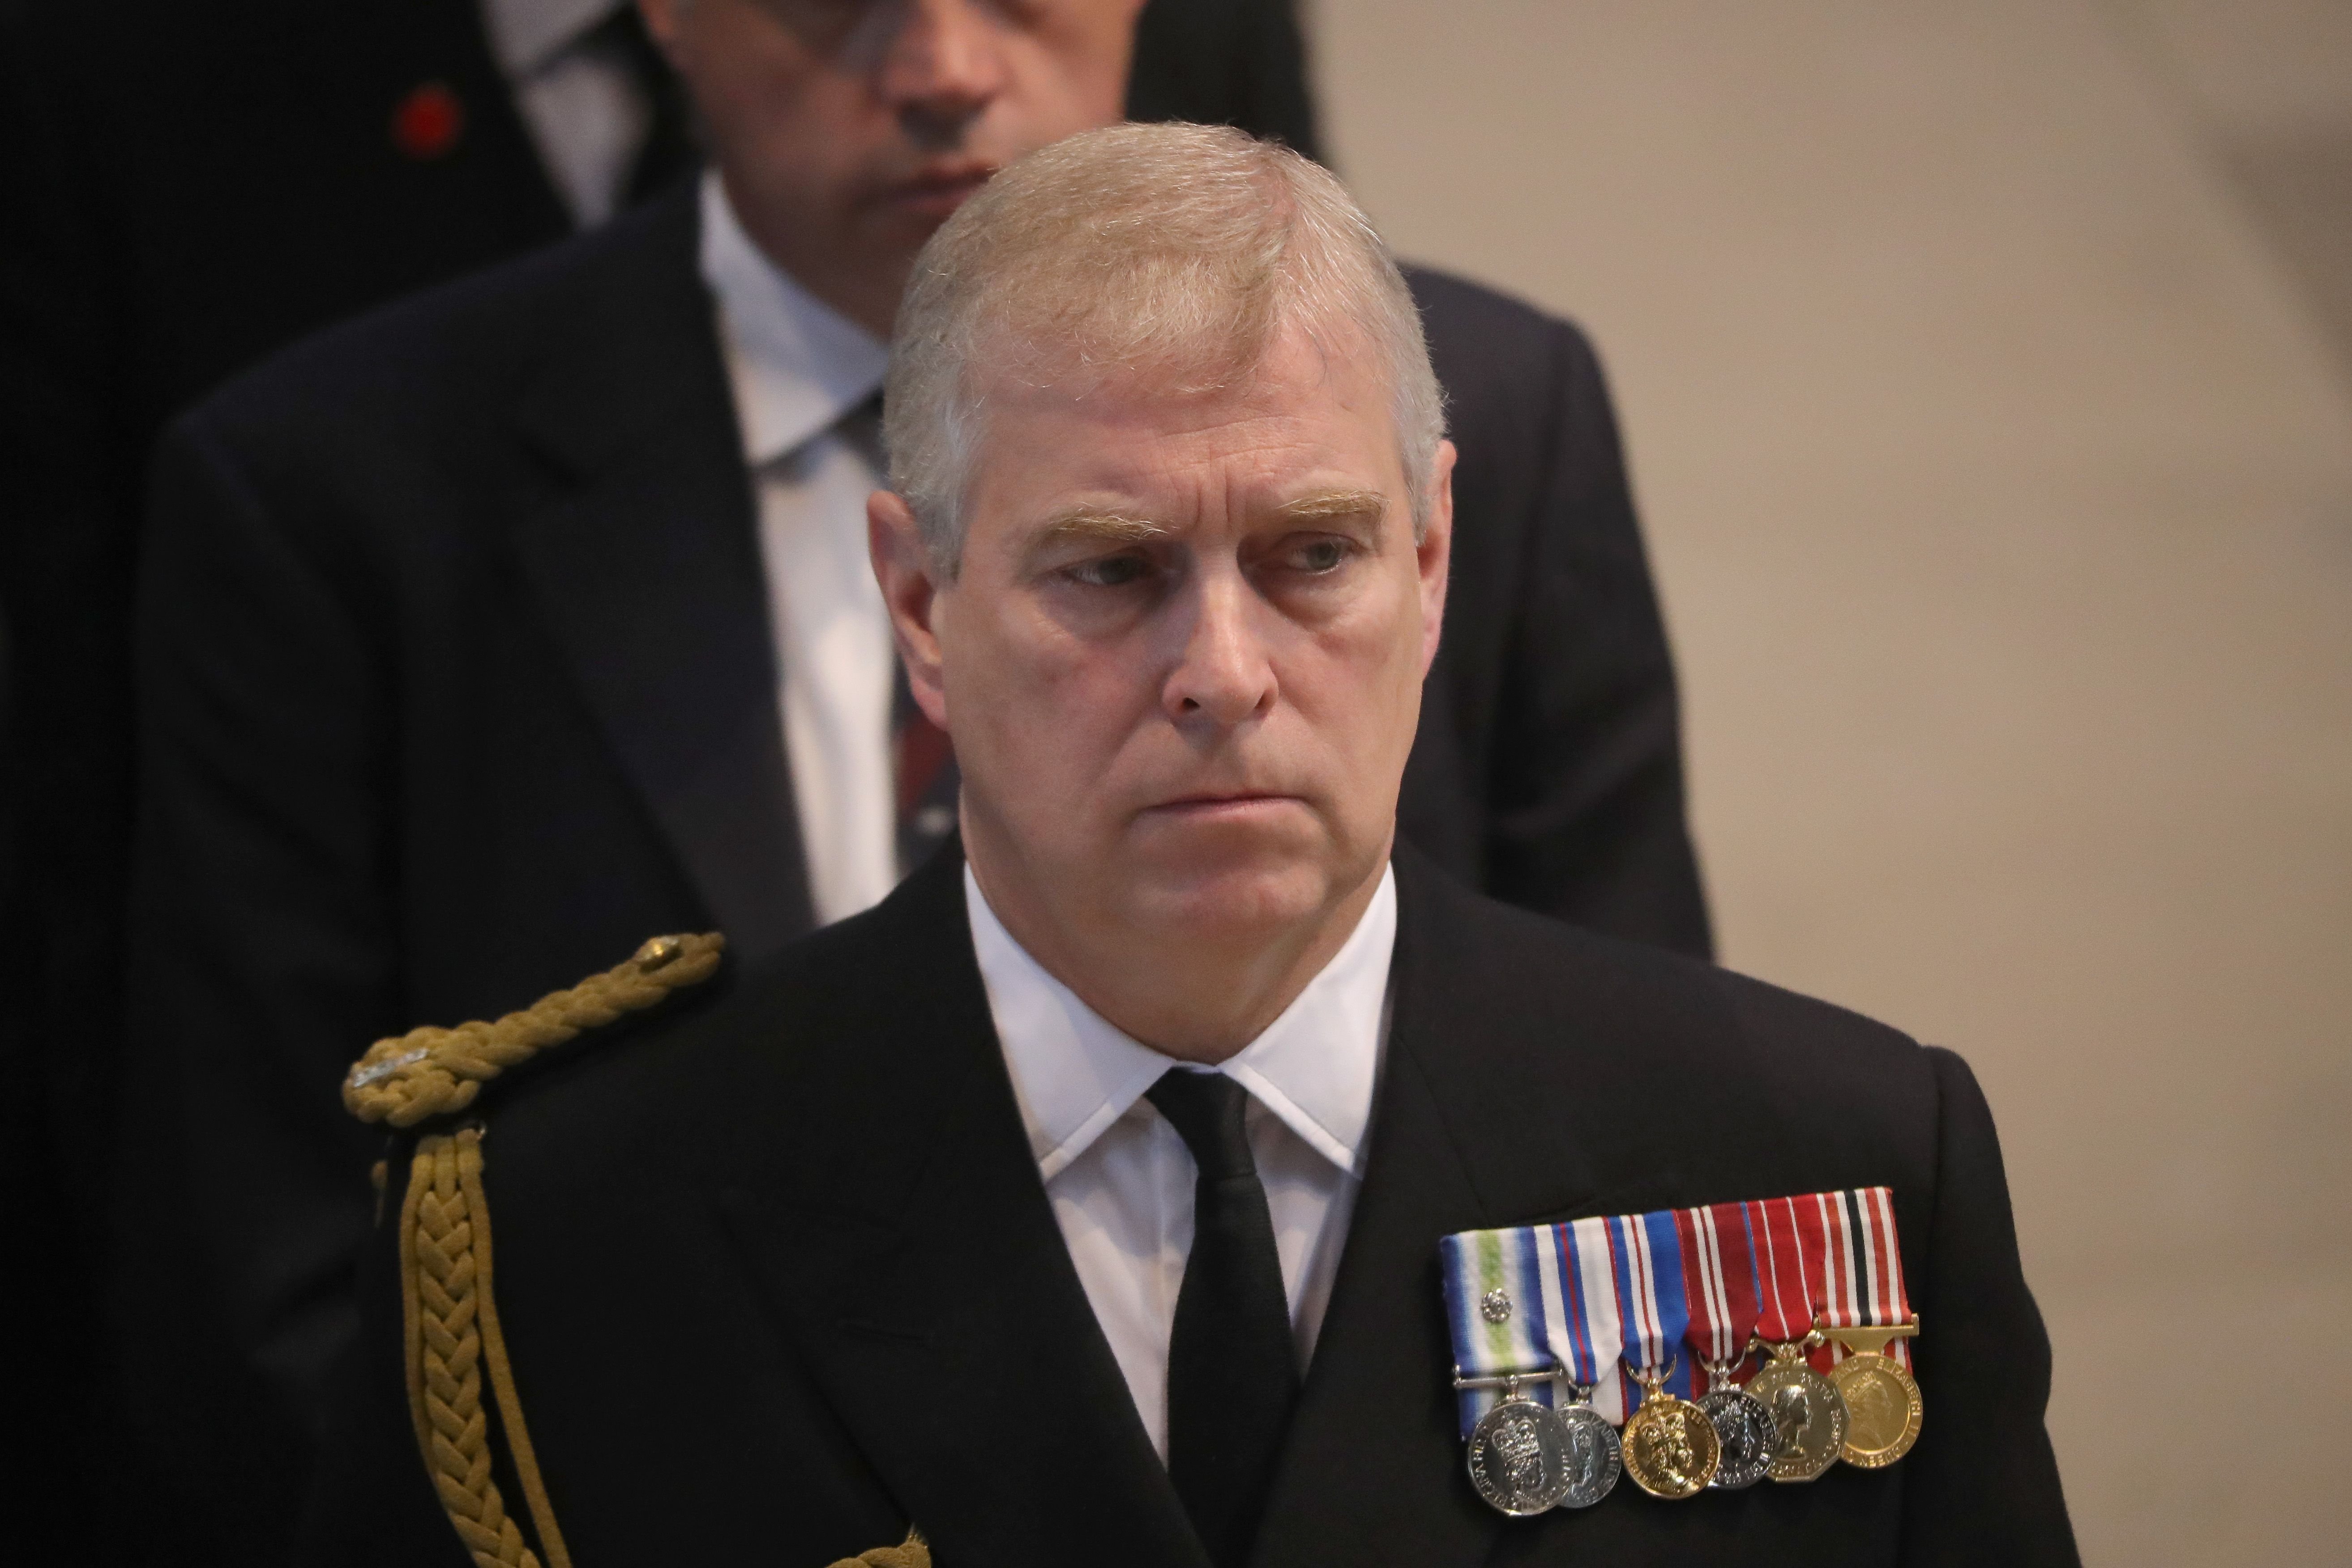 Prince Andrew at a commemoration service at Manchester Cathedral July 1, 2016 in Manchester, England | Photo: Getty Images